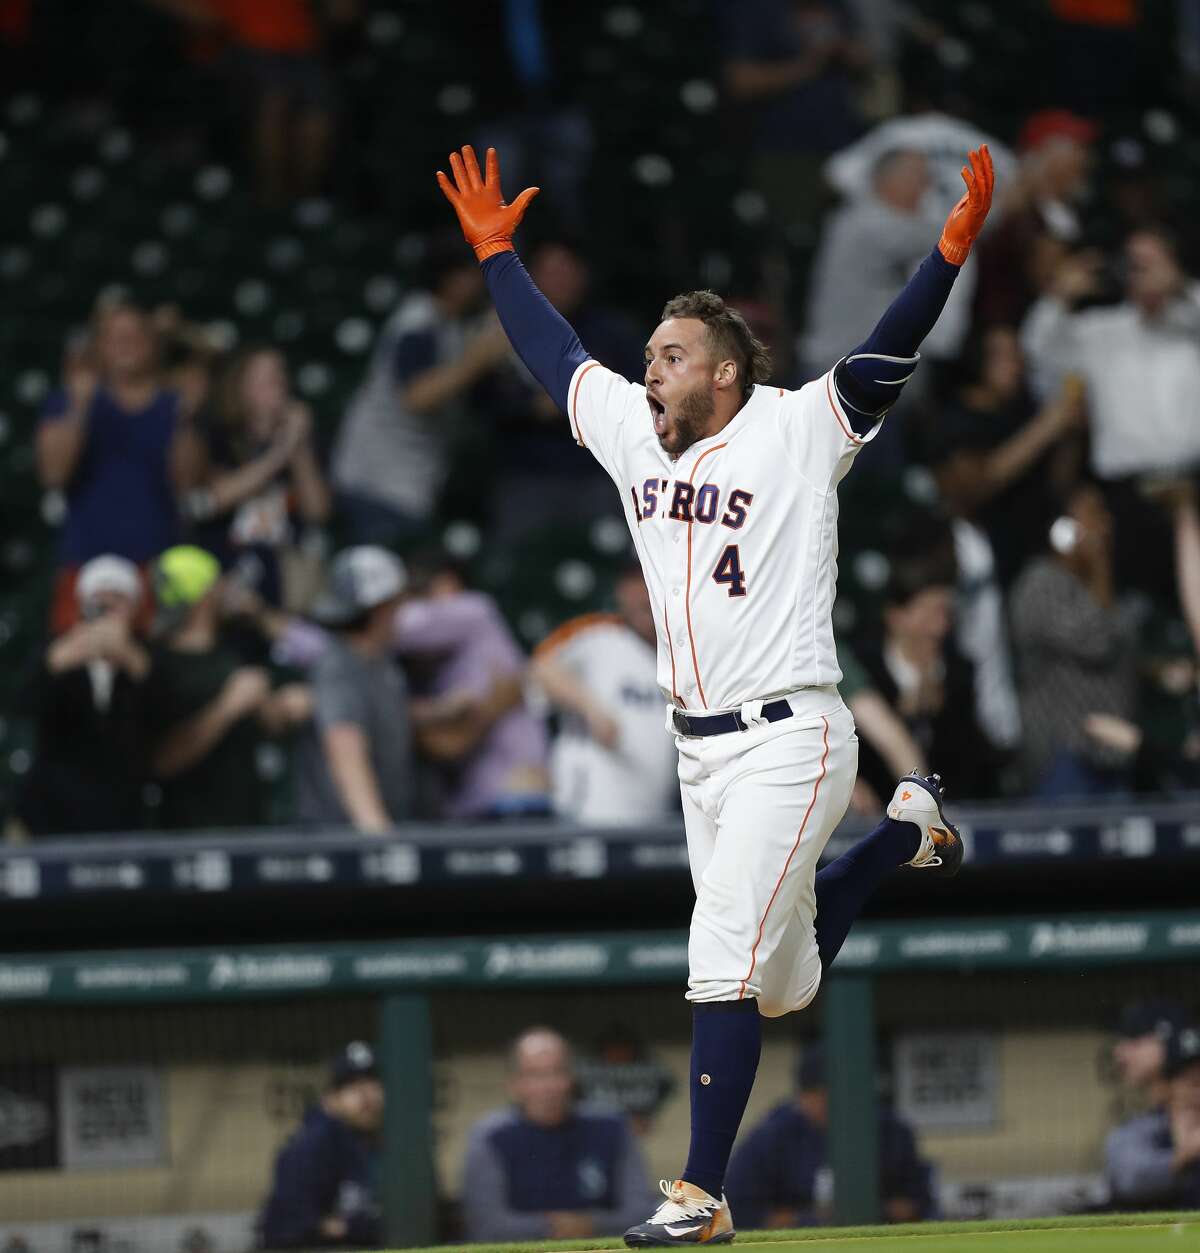 April 5: Astros 5, Mariners 3 (13th inning) Record: 3-0 Houston Chronicle's Player of the Game George Springer 2 for 7/ 1 2B/ 5 RBIs/ Walk-off, three-run homer in 13th inning Unsung Hero of the Game Chris Devenski 4.0 IP/ 0 ER/ 7 SO/ 1 BB